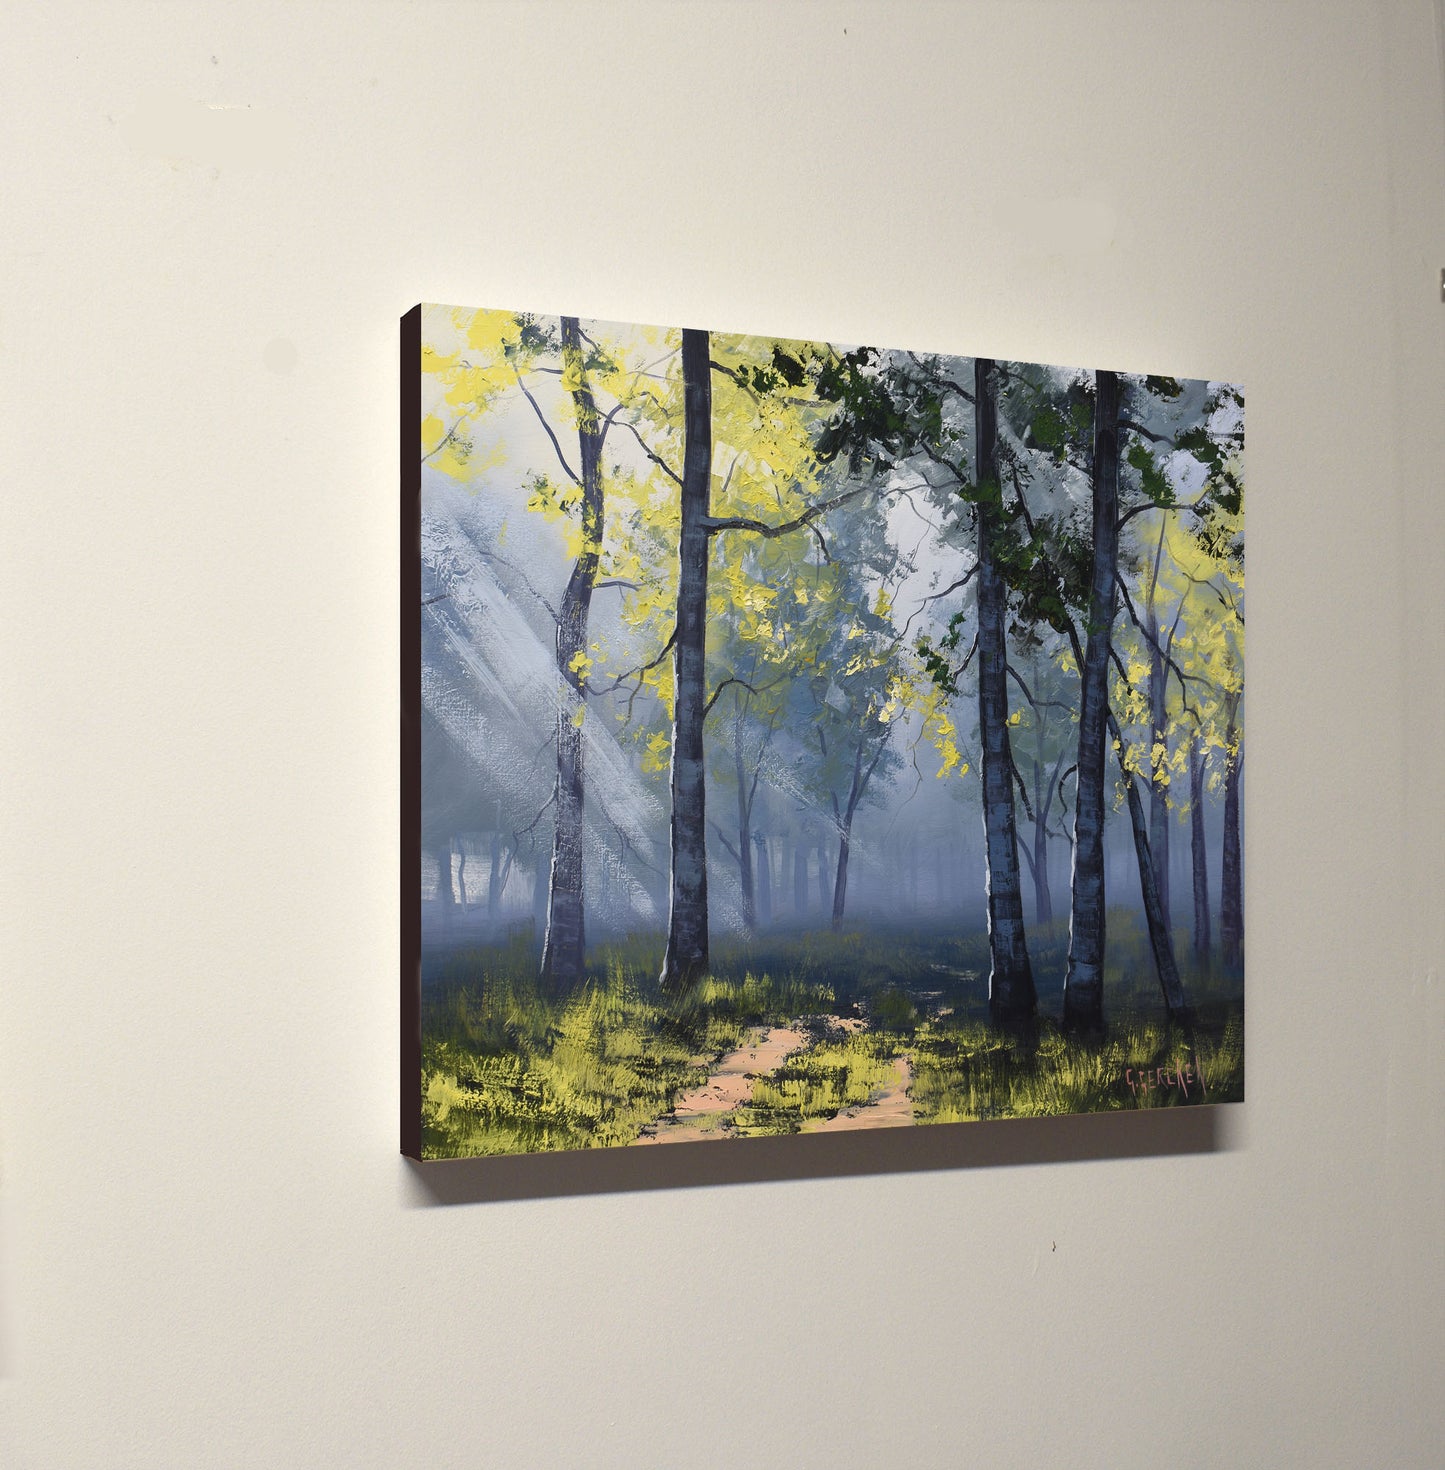 Captivating Green Forest Trees and Sunrays: Original Oil Painting by Artist Graham Gercken